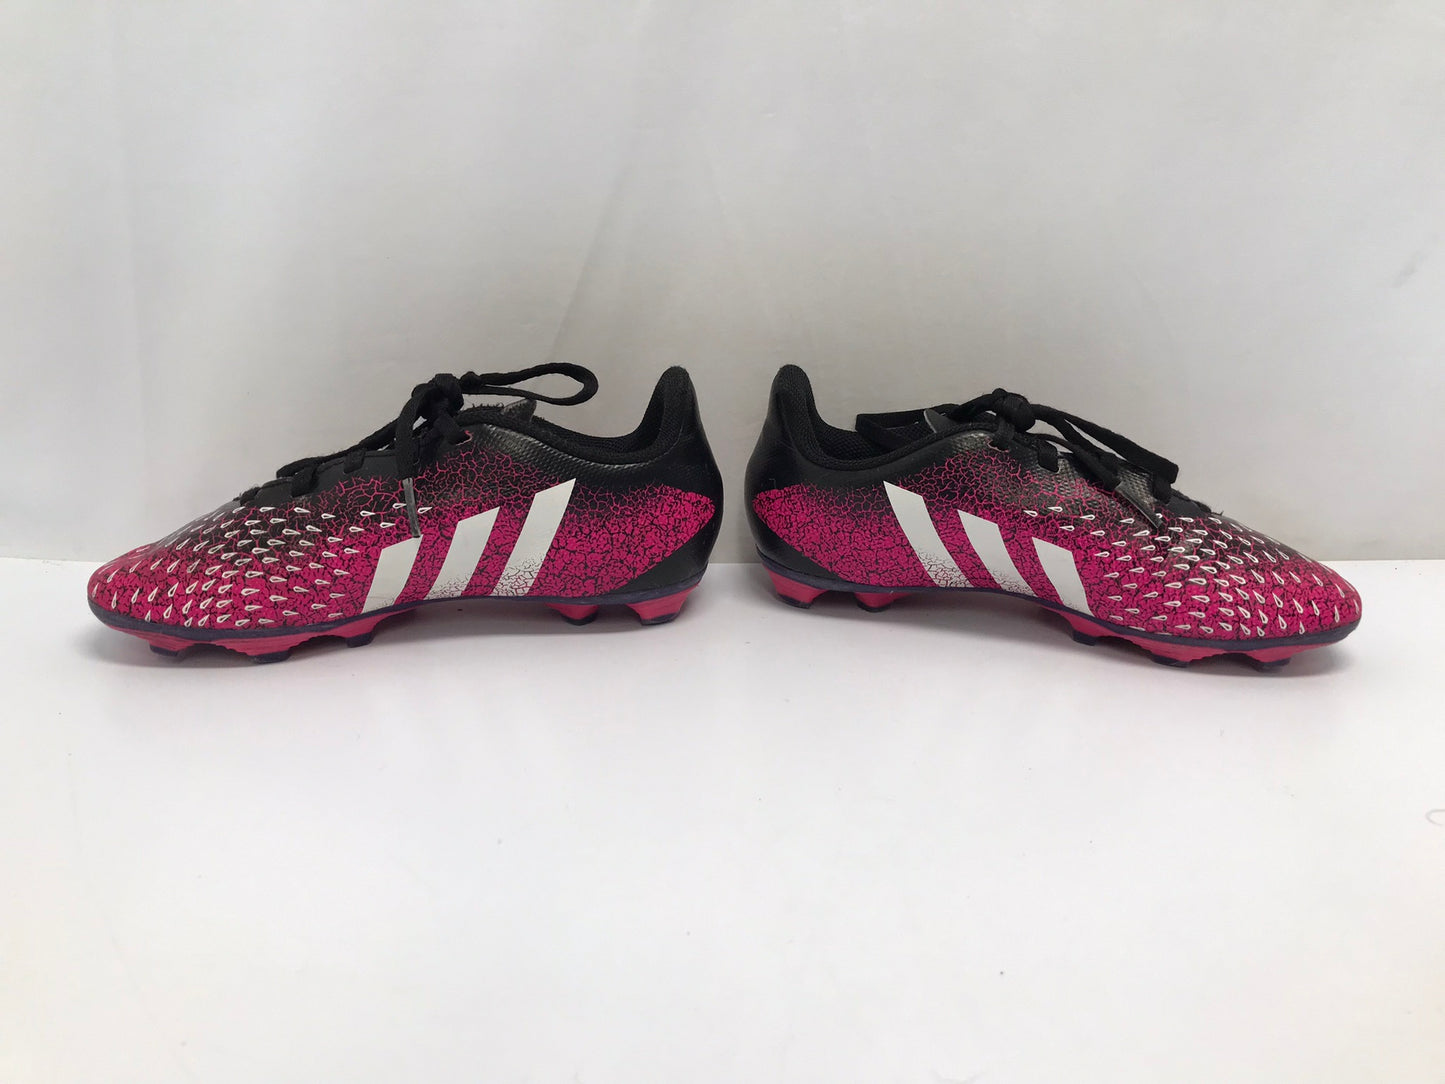 Soccer Shoes Cleats Child Size 2 Adidas Preditor Fushia Black White Excellent